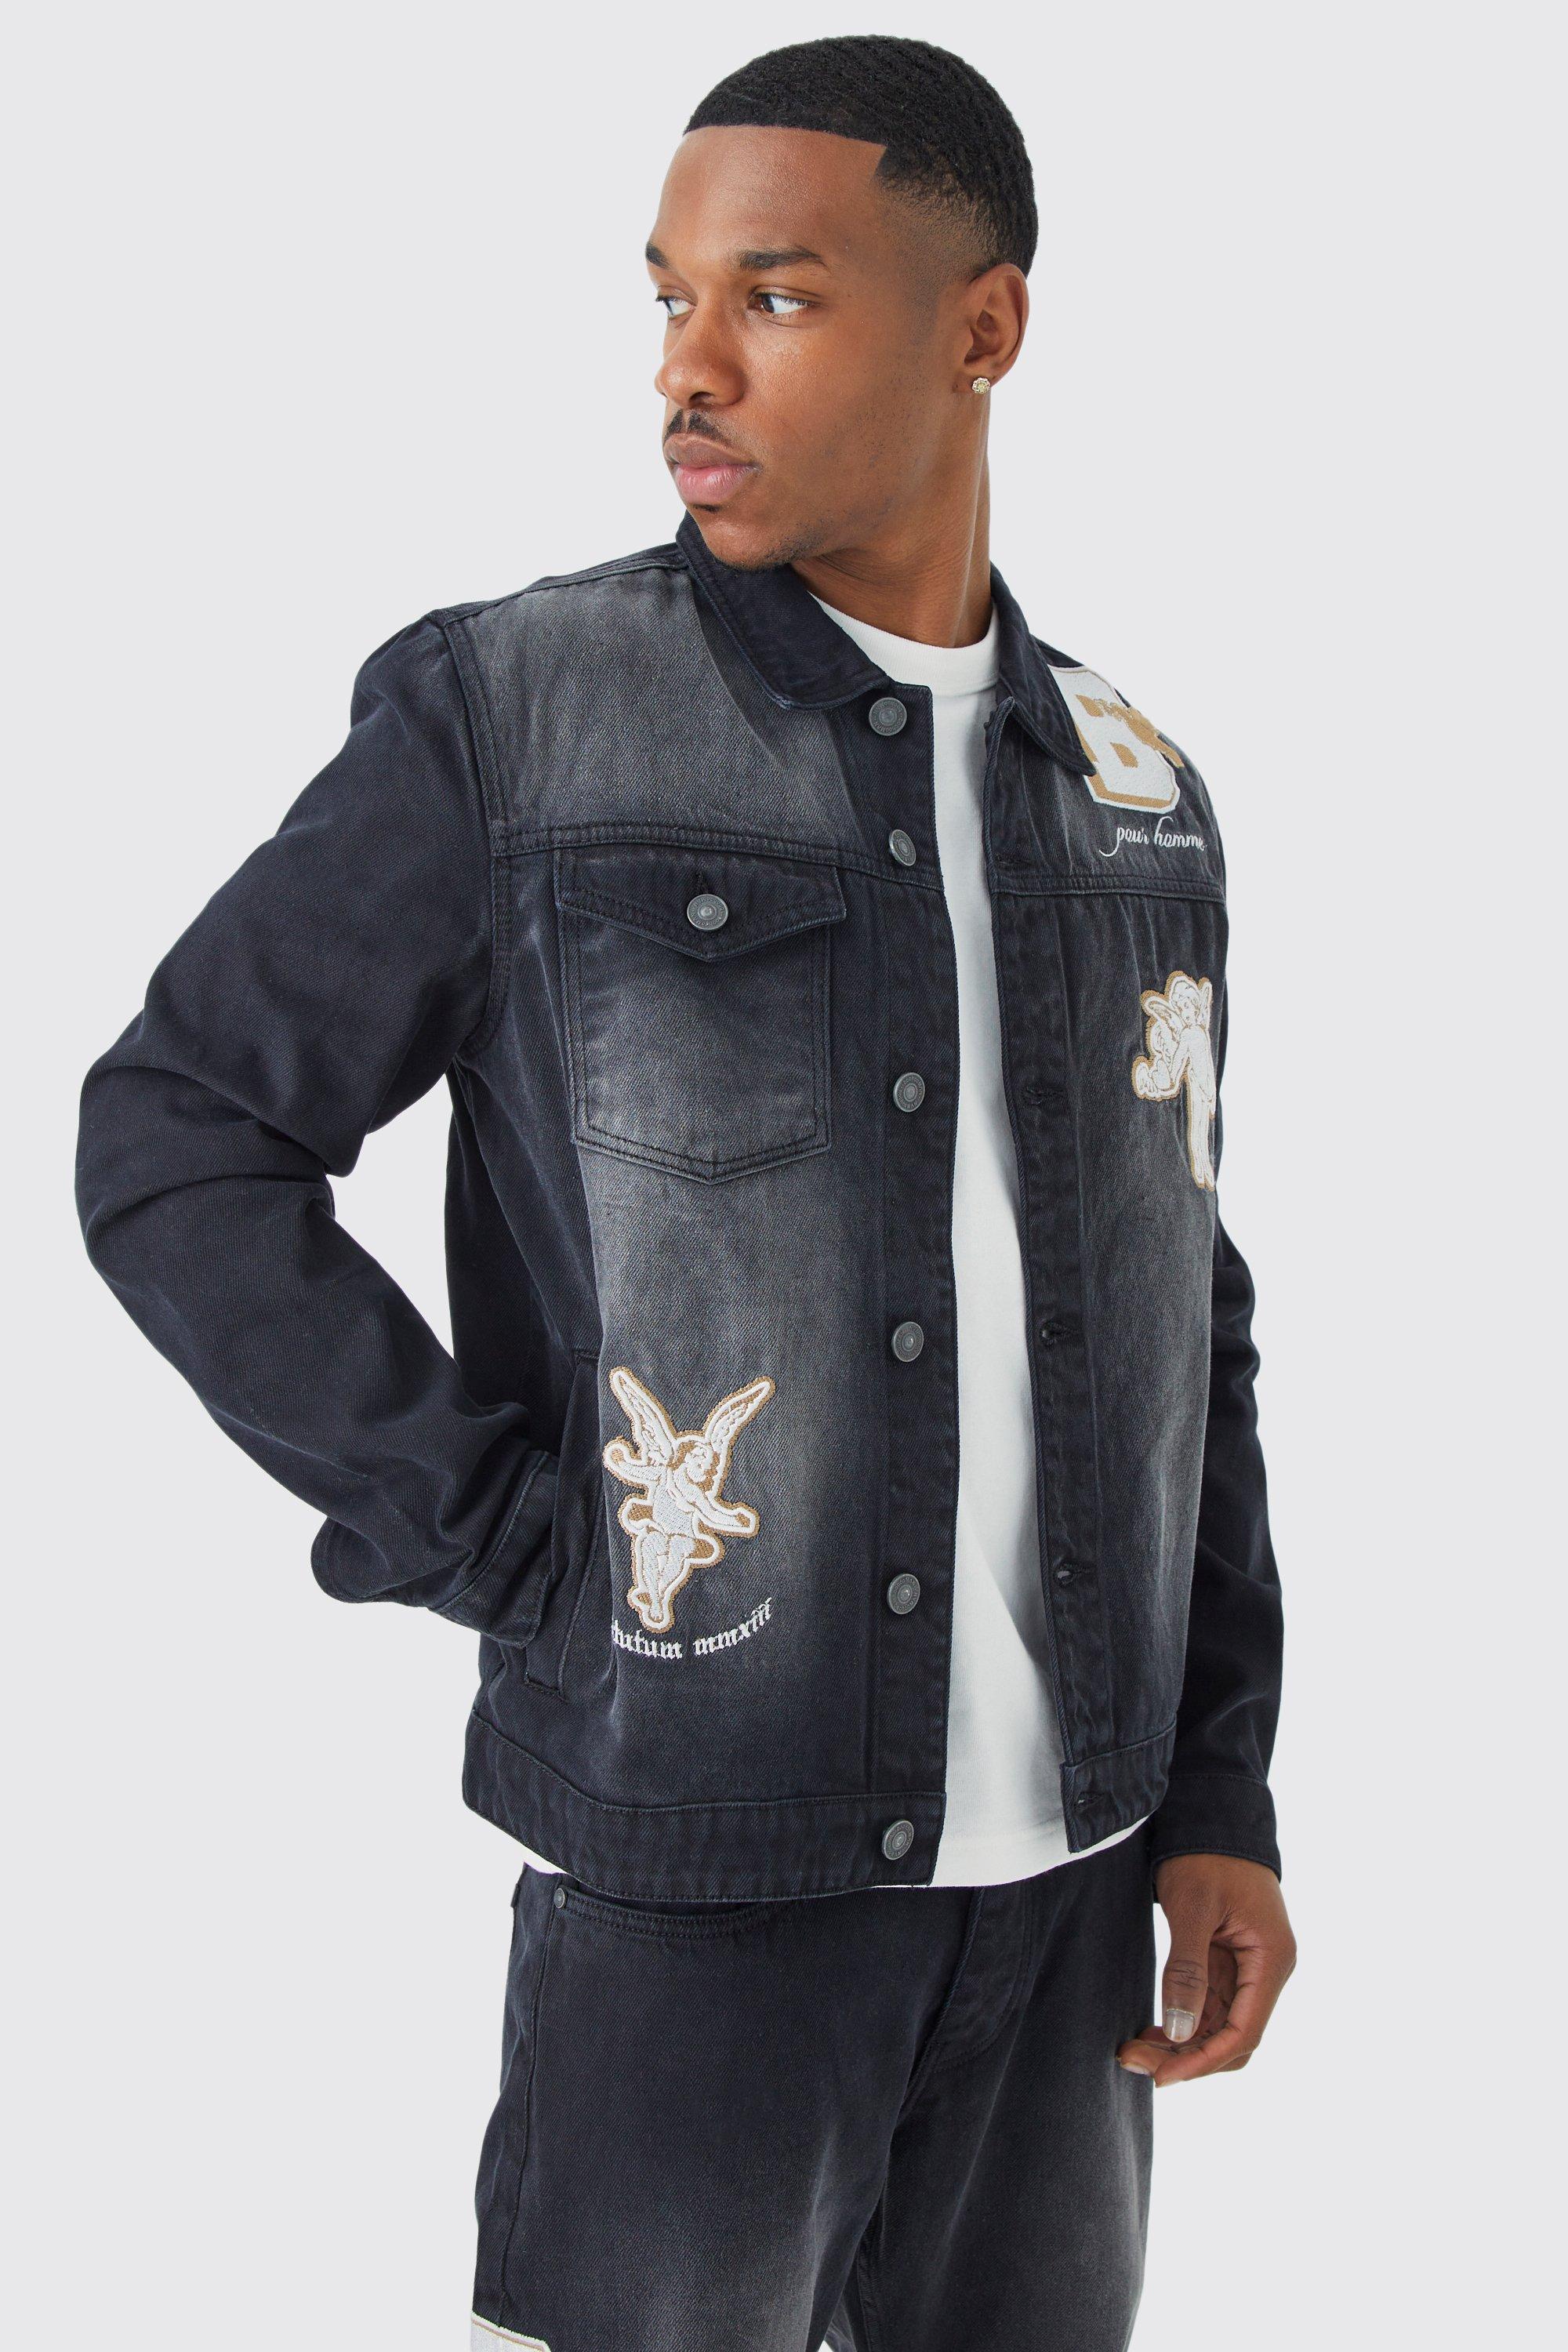 boohooMAN Applique and Embroidered Denim Jacket - Black - Size XL